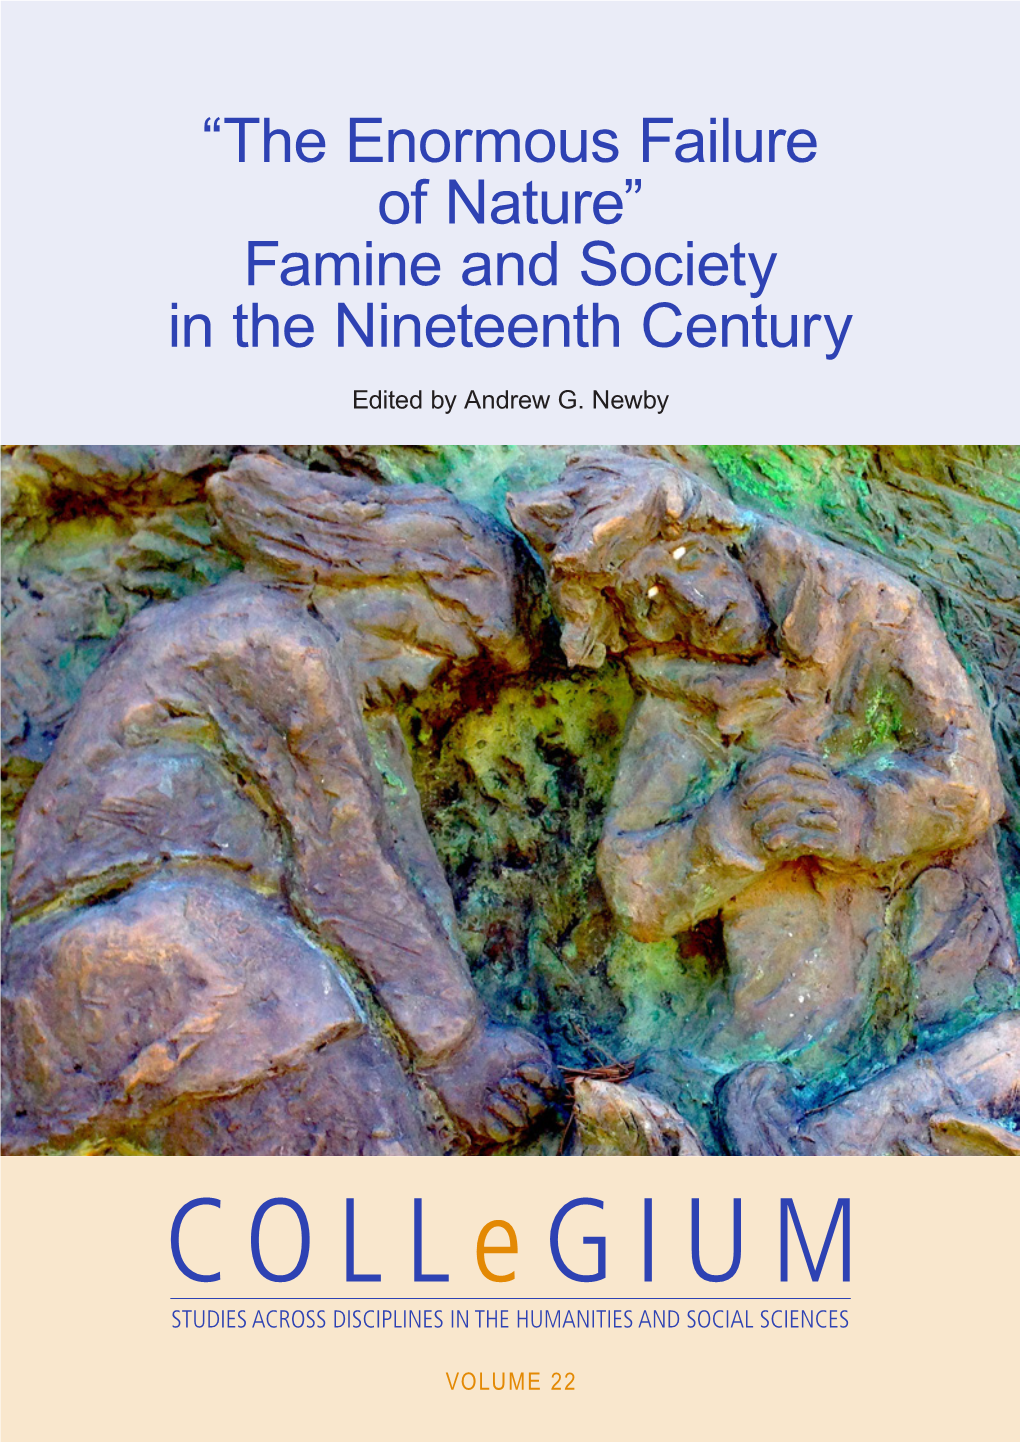 Famine and Society in the Nineteenth Century Edited by Andrew G